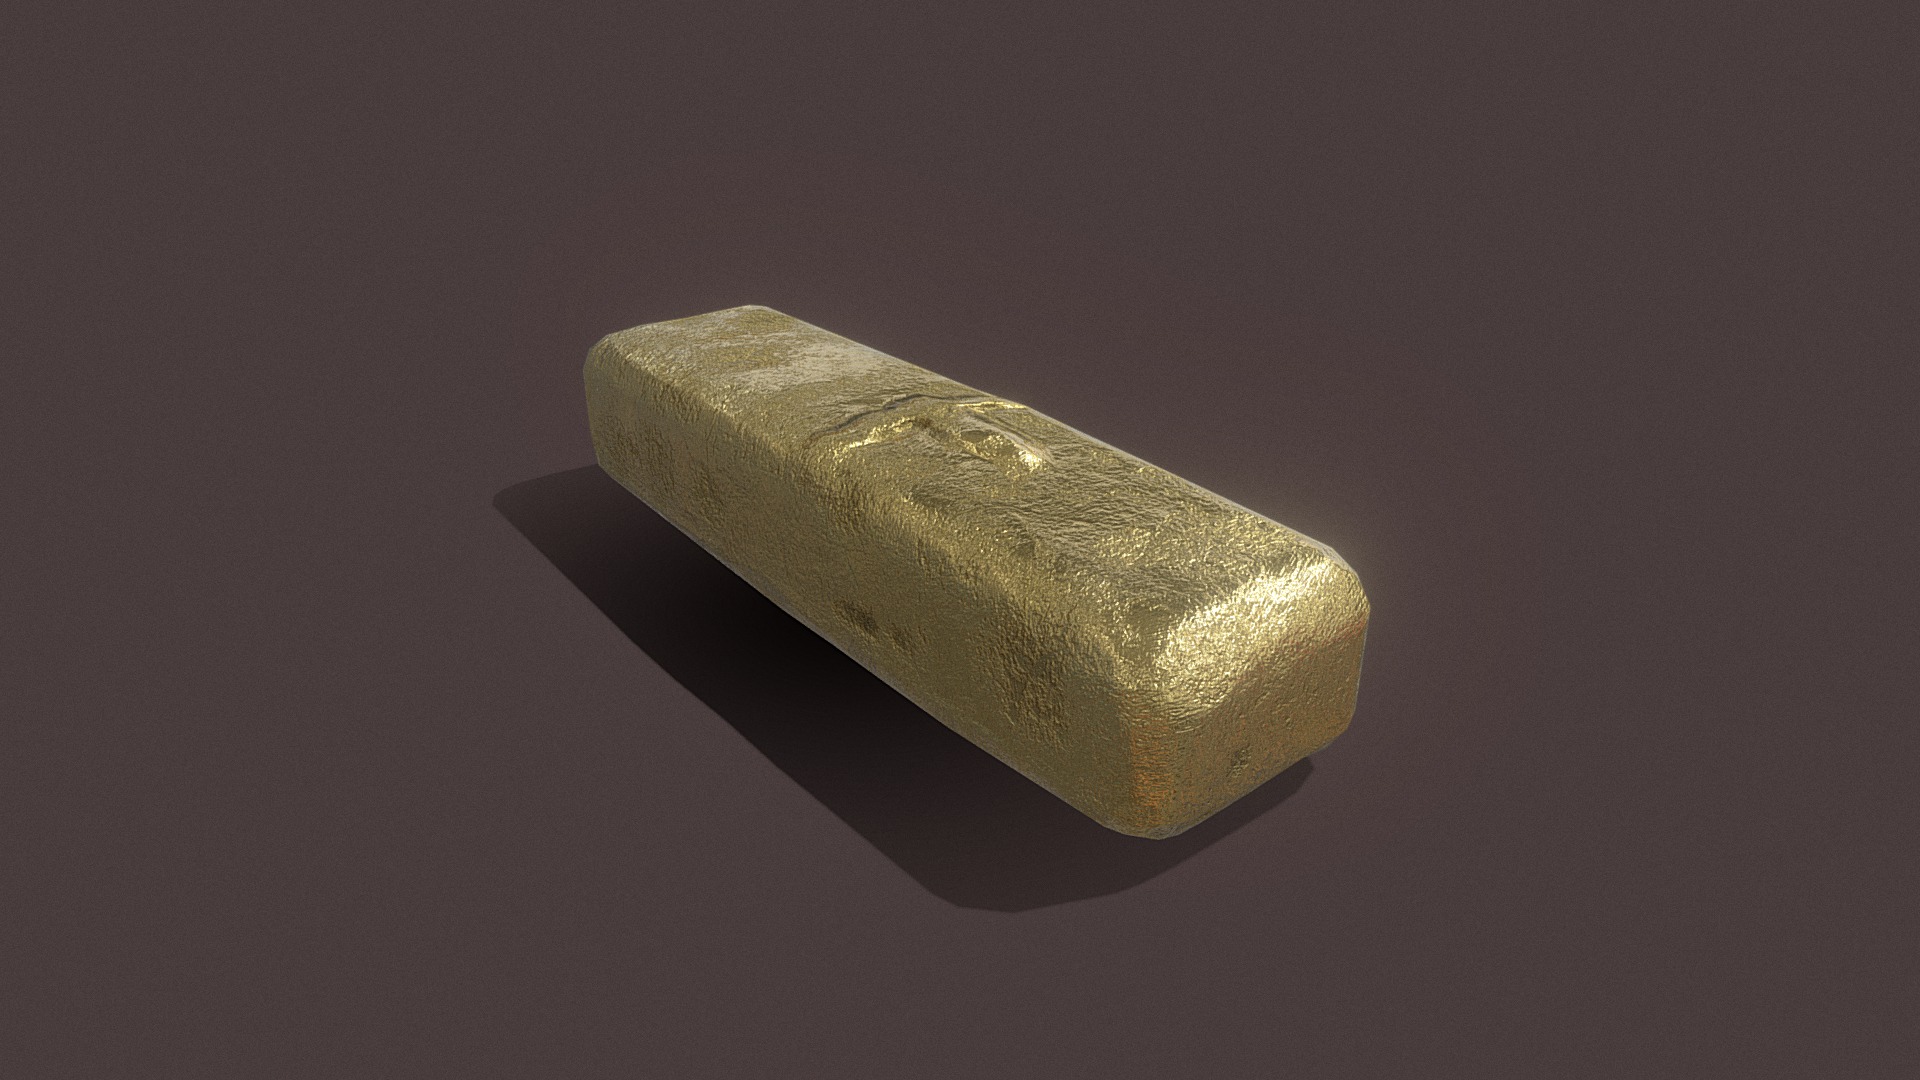 3D model Gold Ingot Small - This is a 3D model of the Gold Ingot Small. The 3D model is about a stone with a dark background.